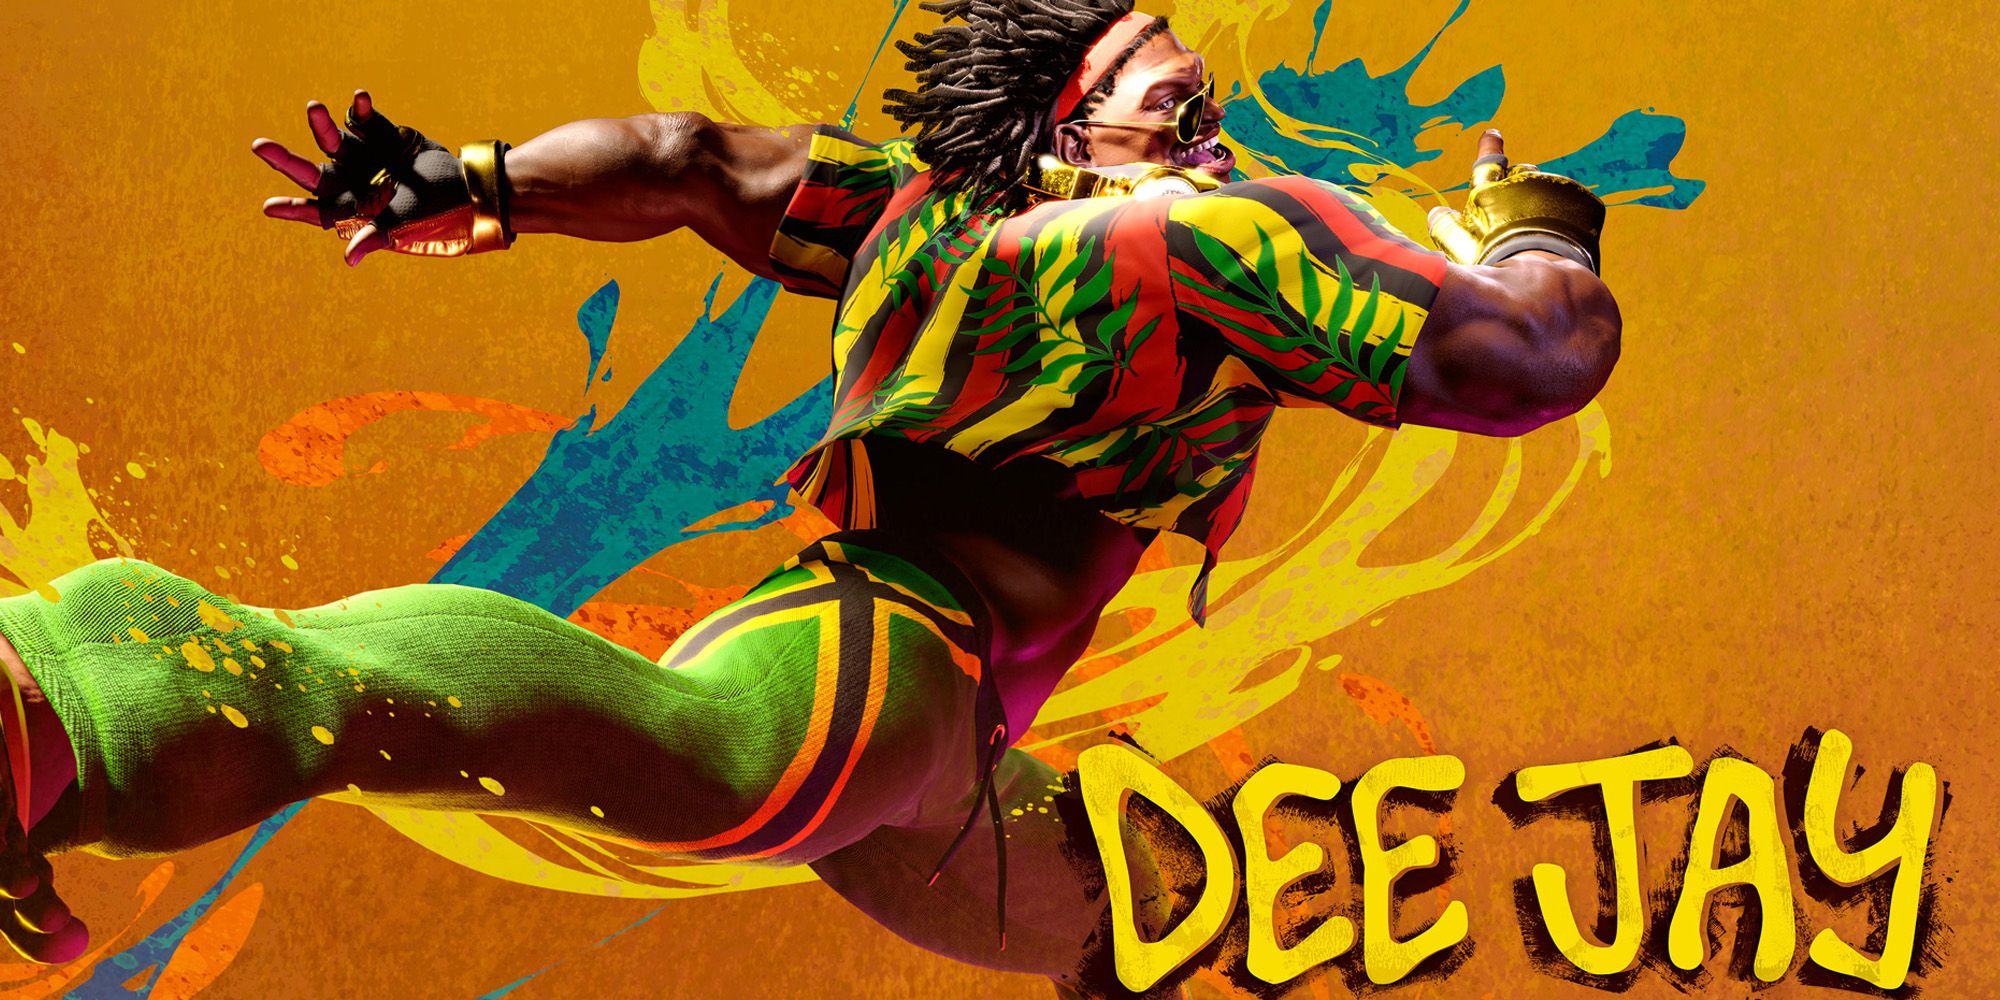 Street Fighter 6 character Dee Jay in Jamaica-themed attire dramatically swinging a leg back in a kick.